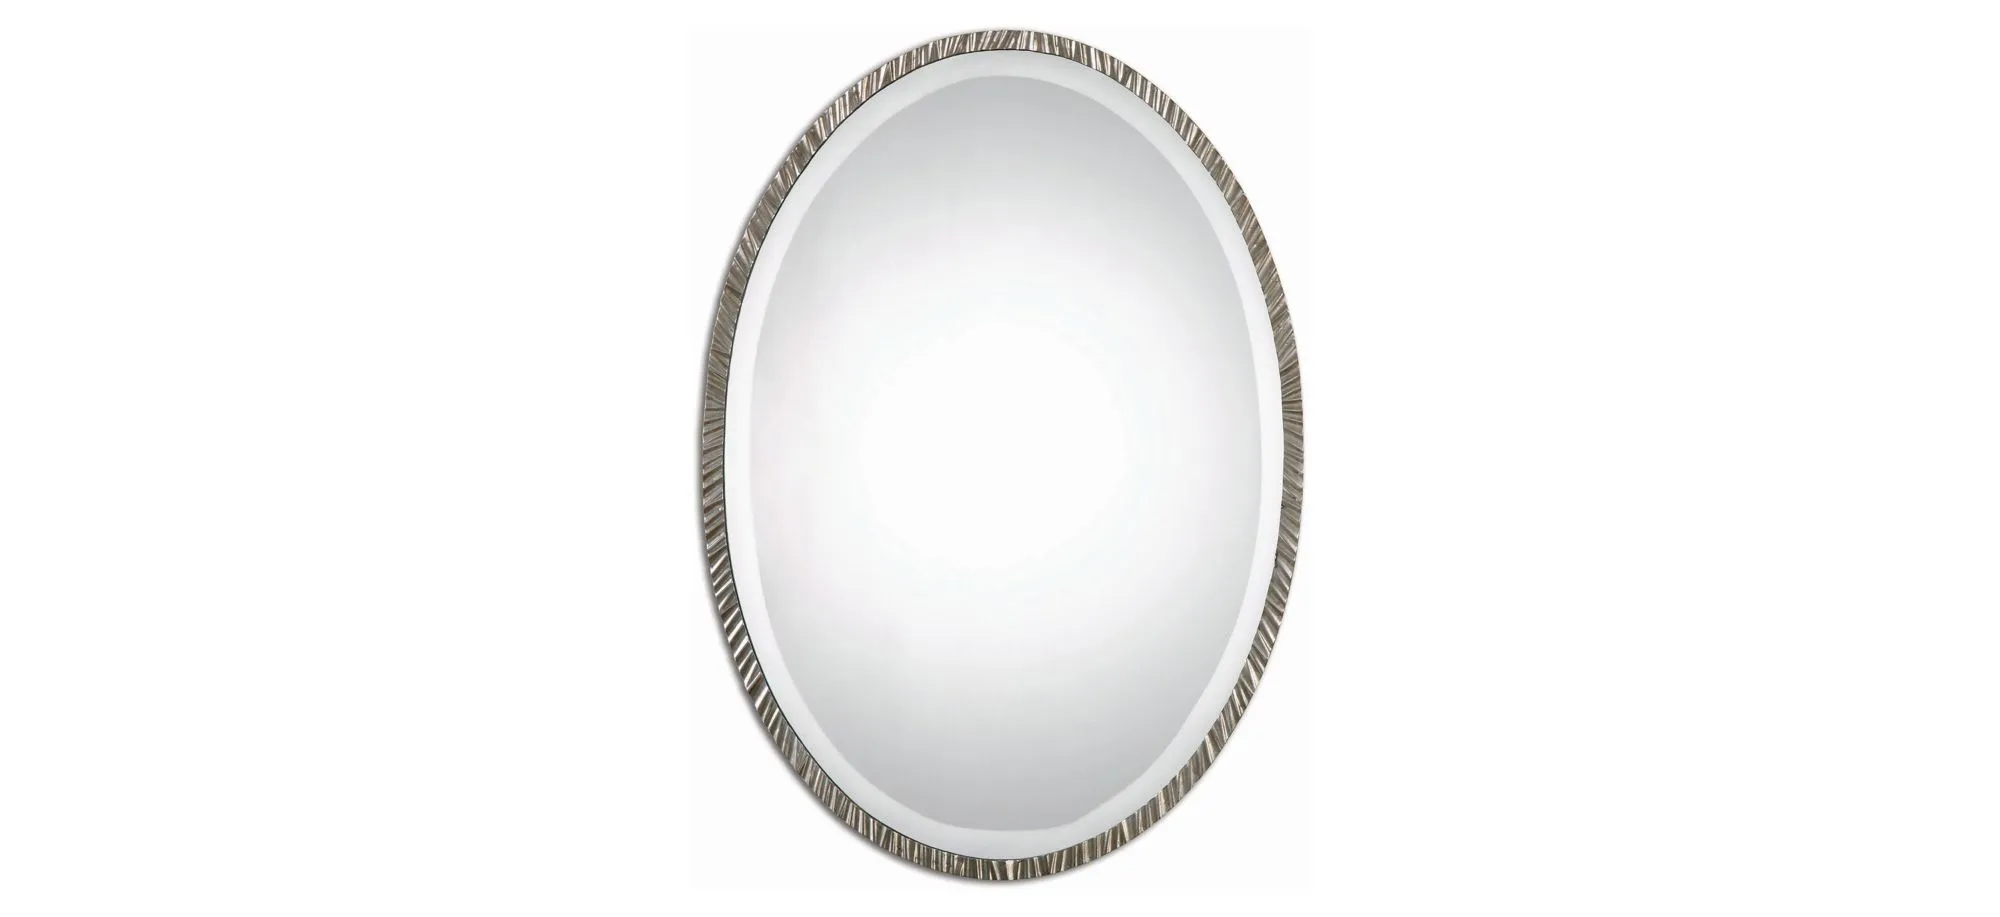 Annadel Oval Wall Mirror in Polished Nickel by Uttermost